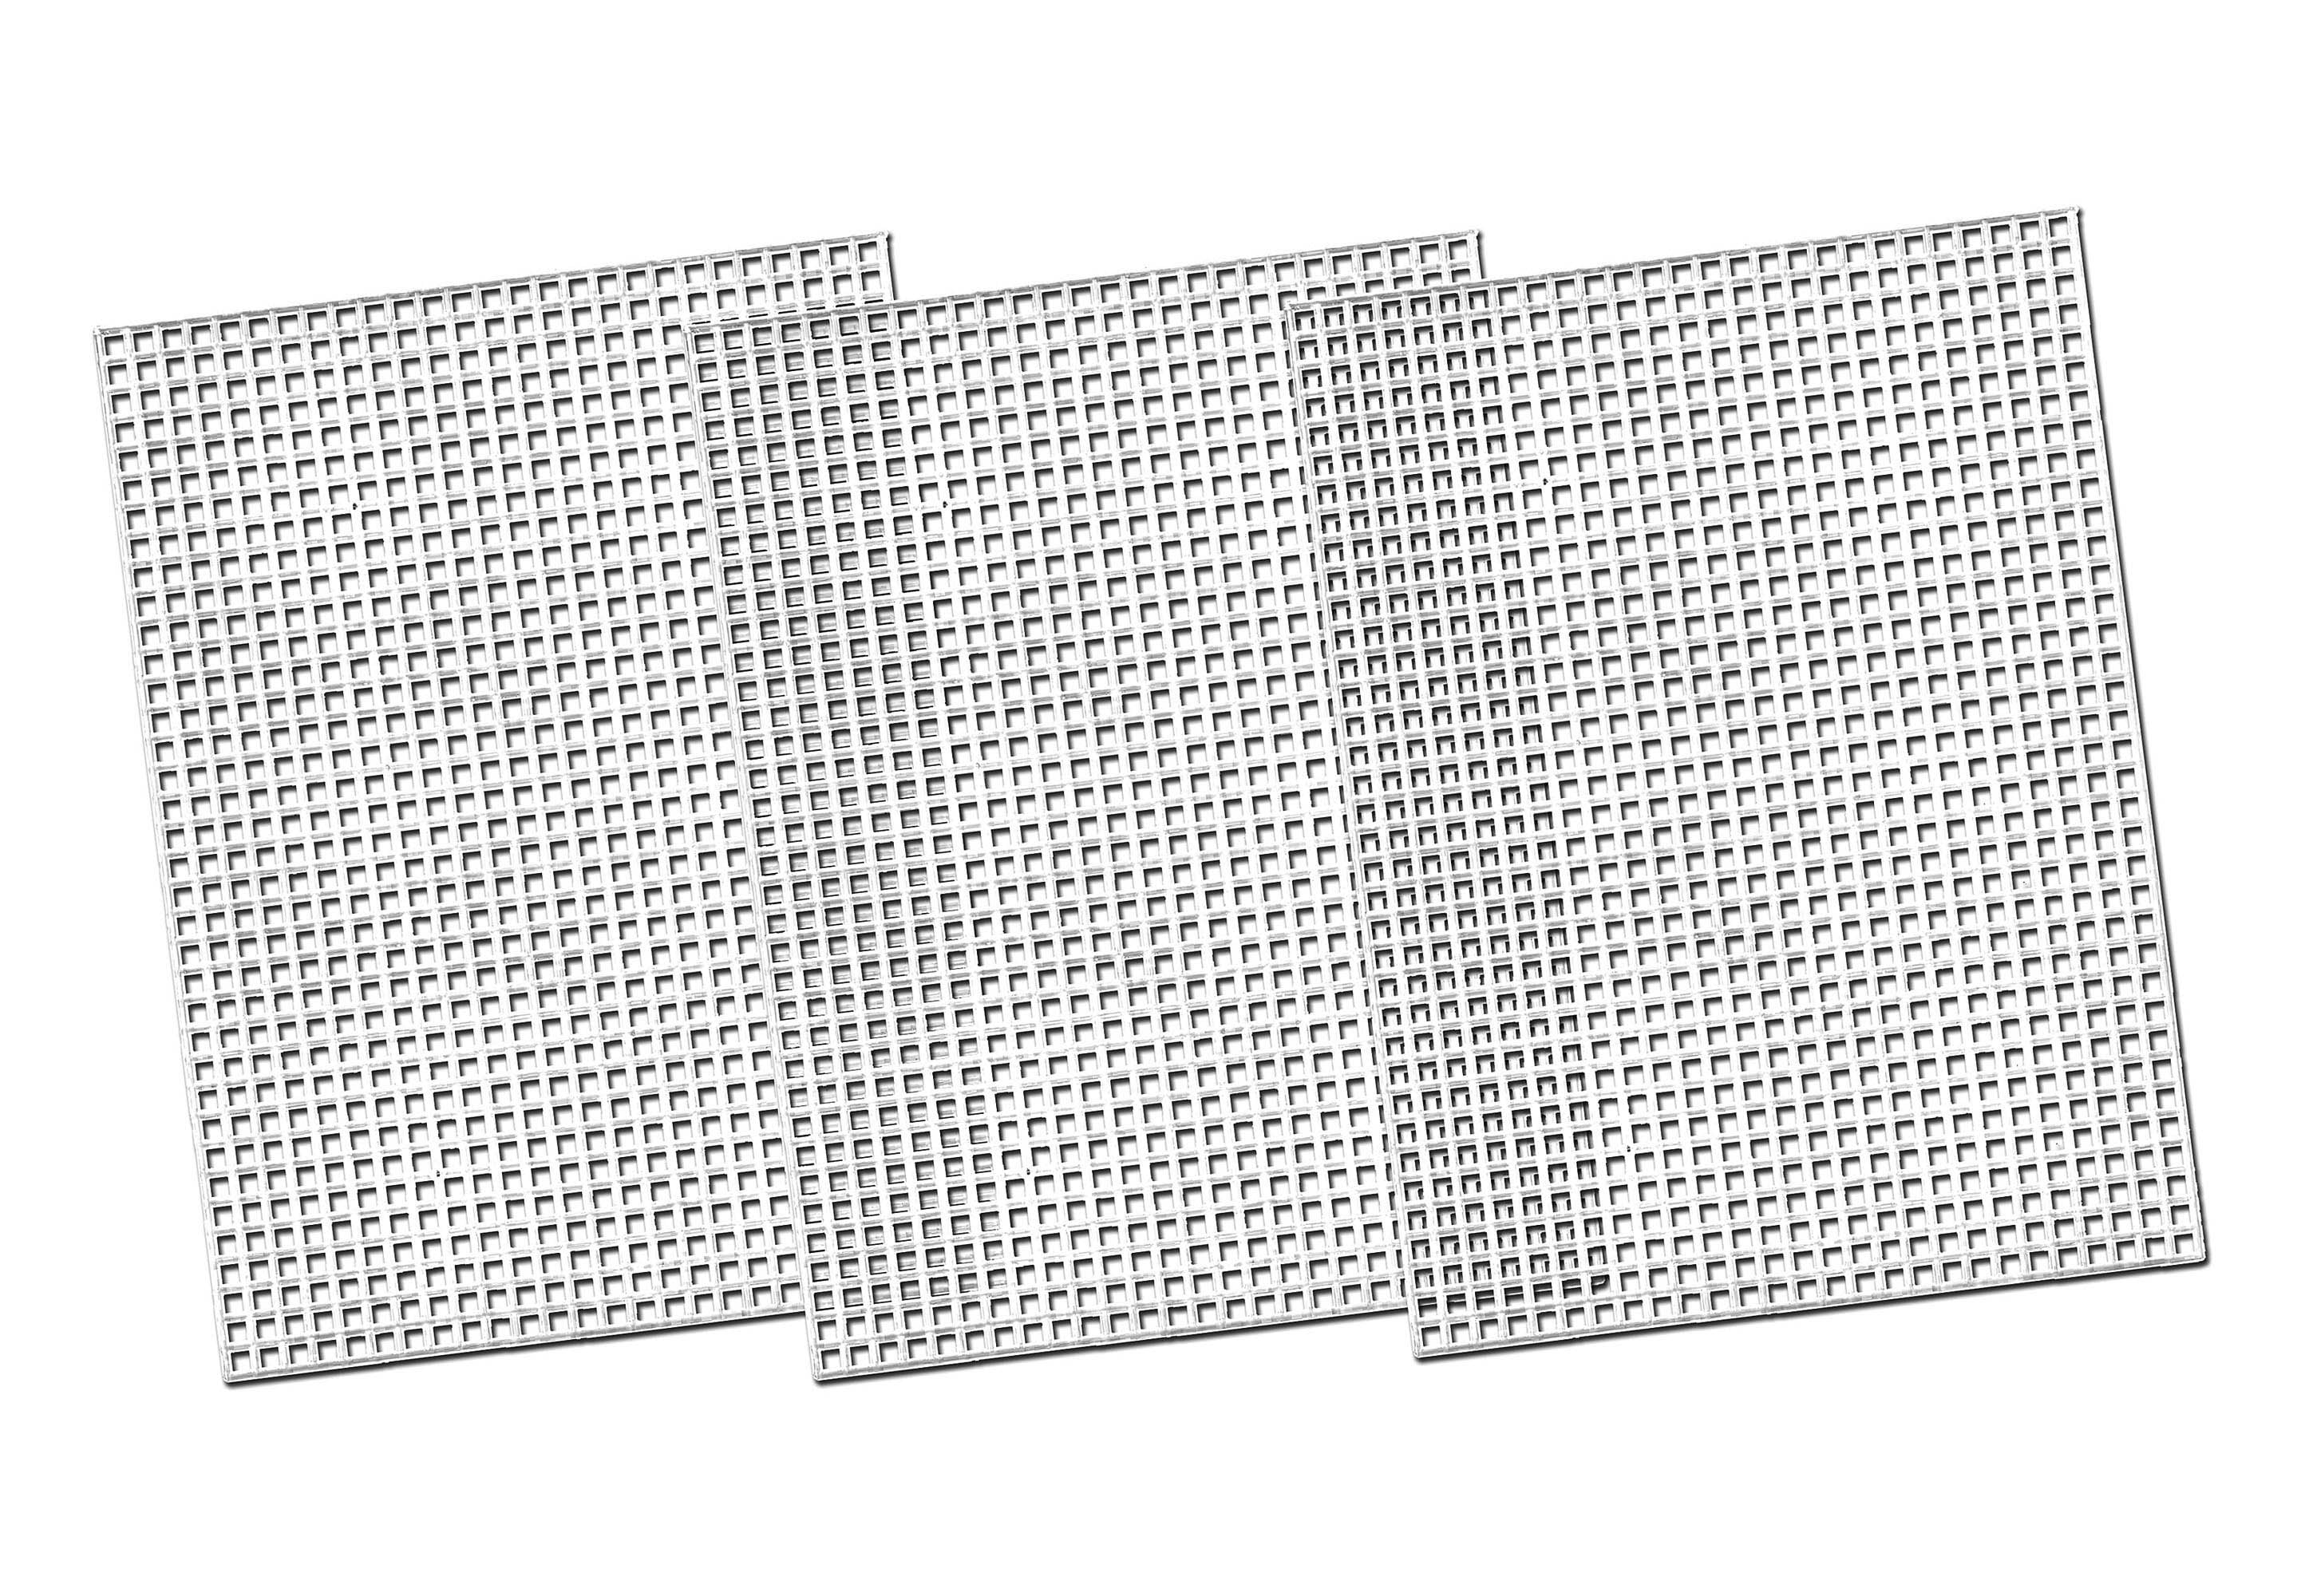 Plastic Mesh Canvas Sheet (23.5 by 16) [MD0711] 